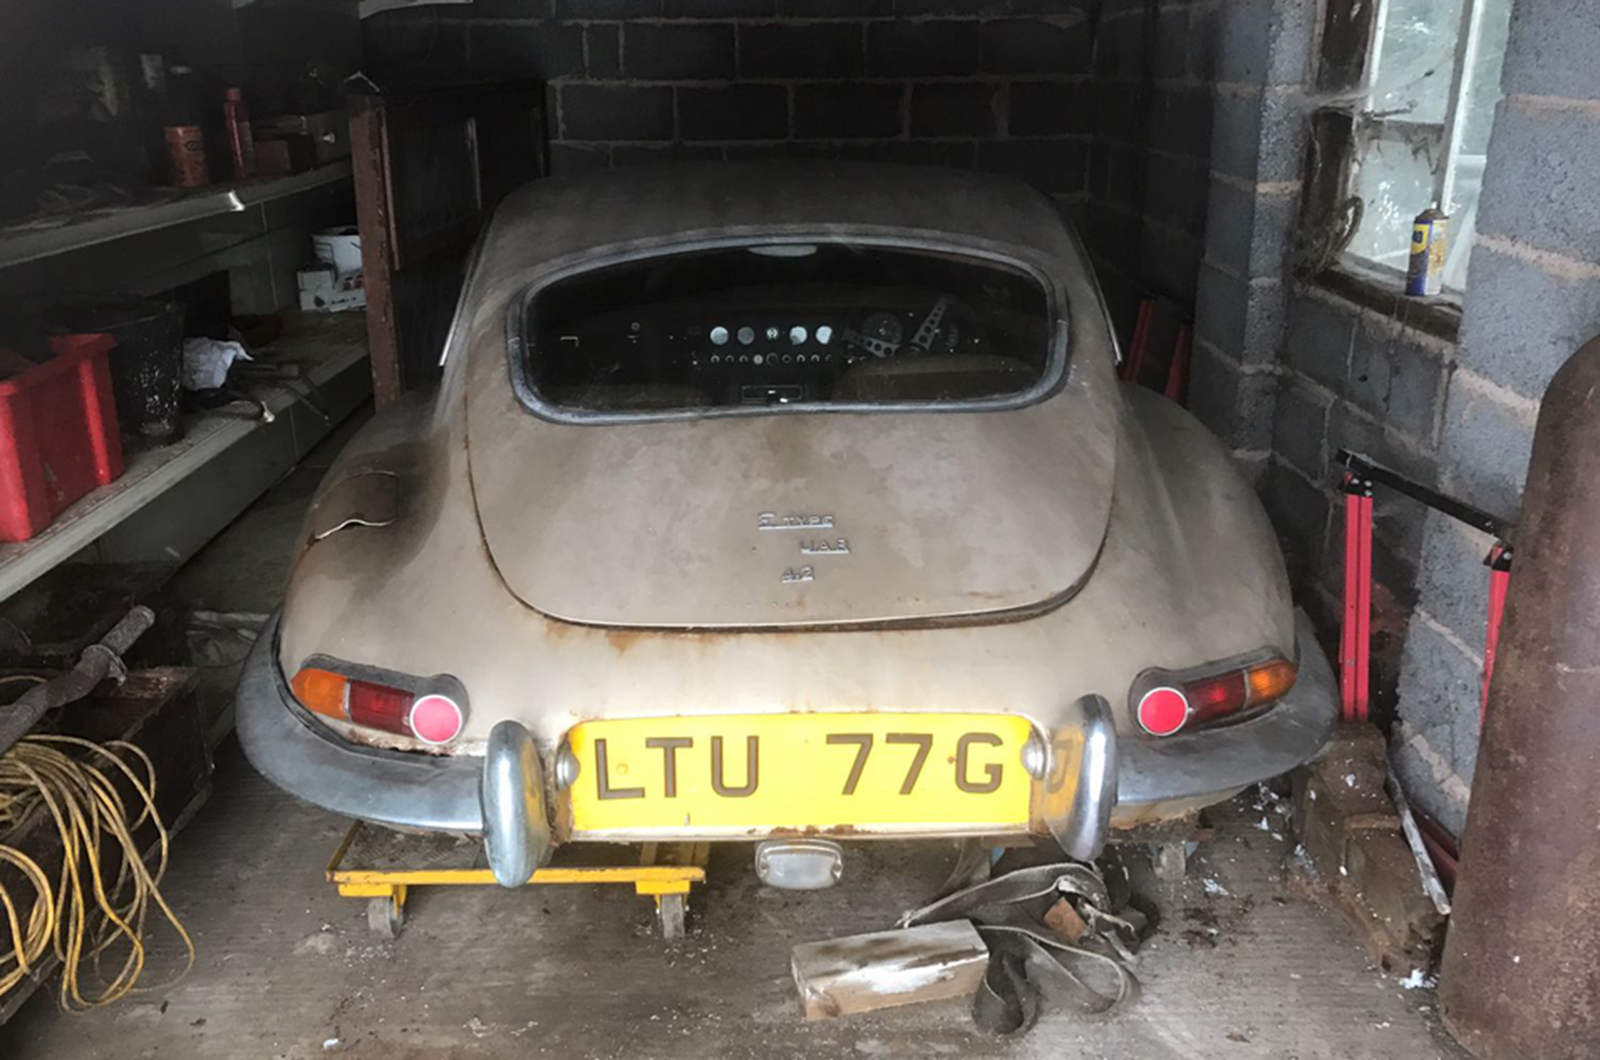 Classic & Sports Car – Barn-find E-type up for auction next month